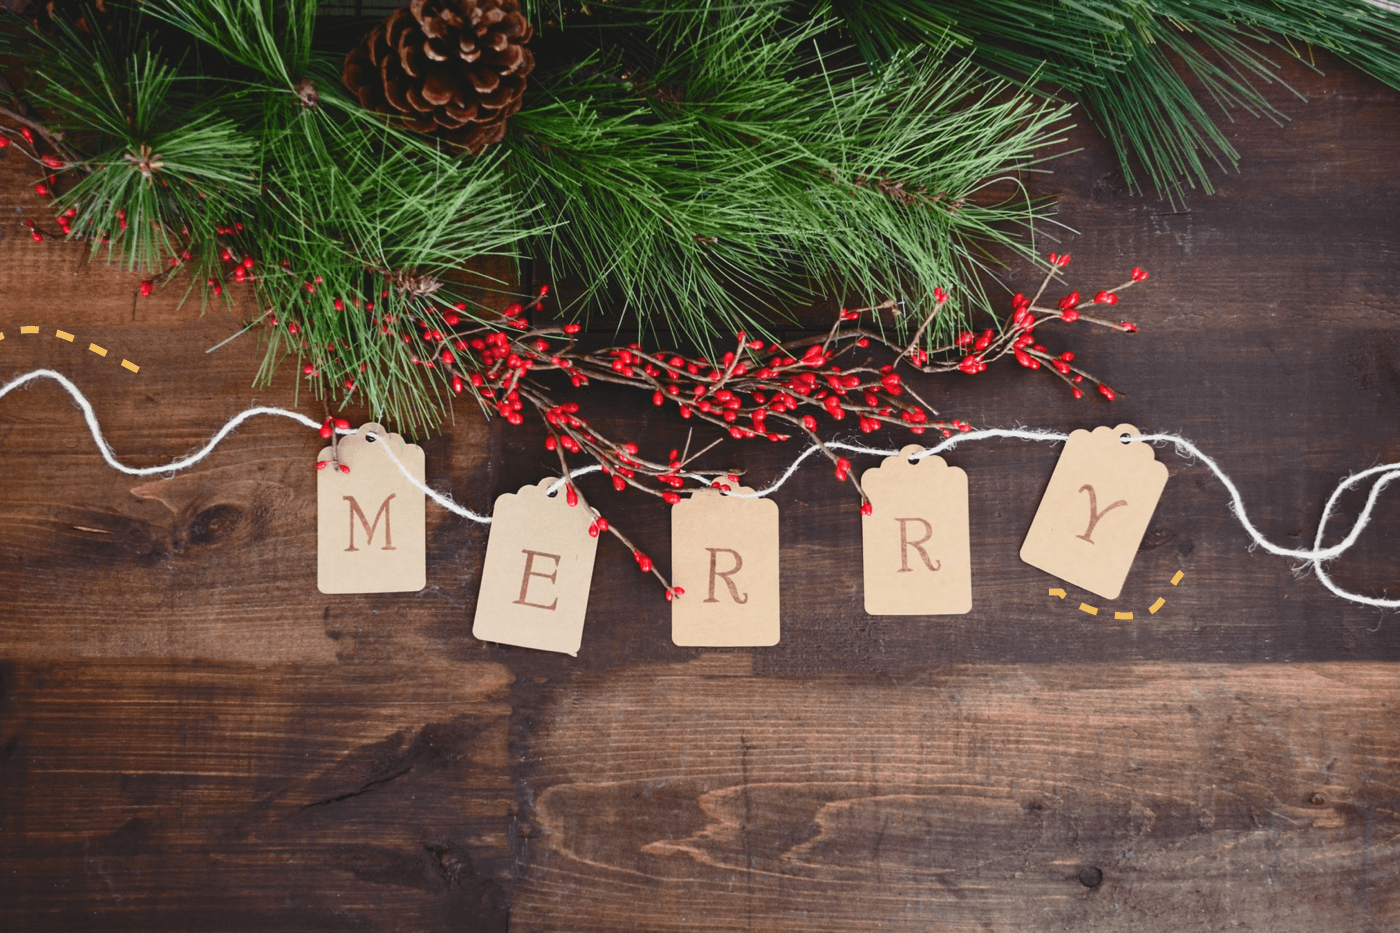 60 Ecommerce Christmas Subject Lines To Spread Some Holiday Cheer